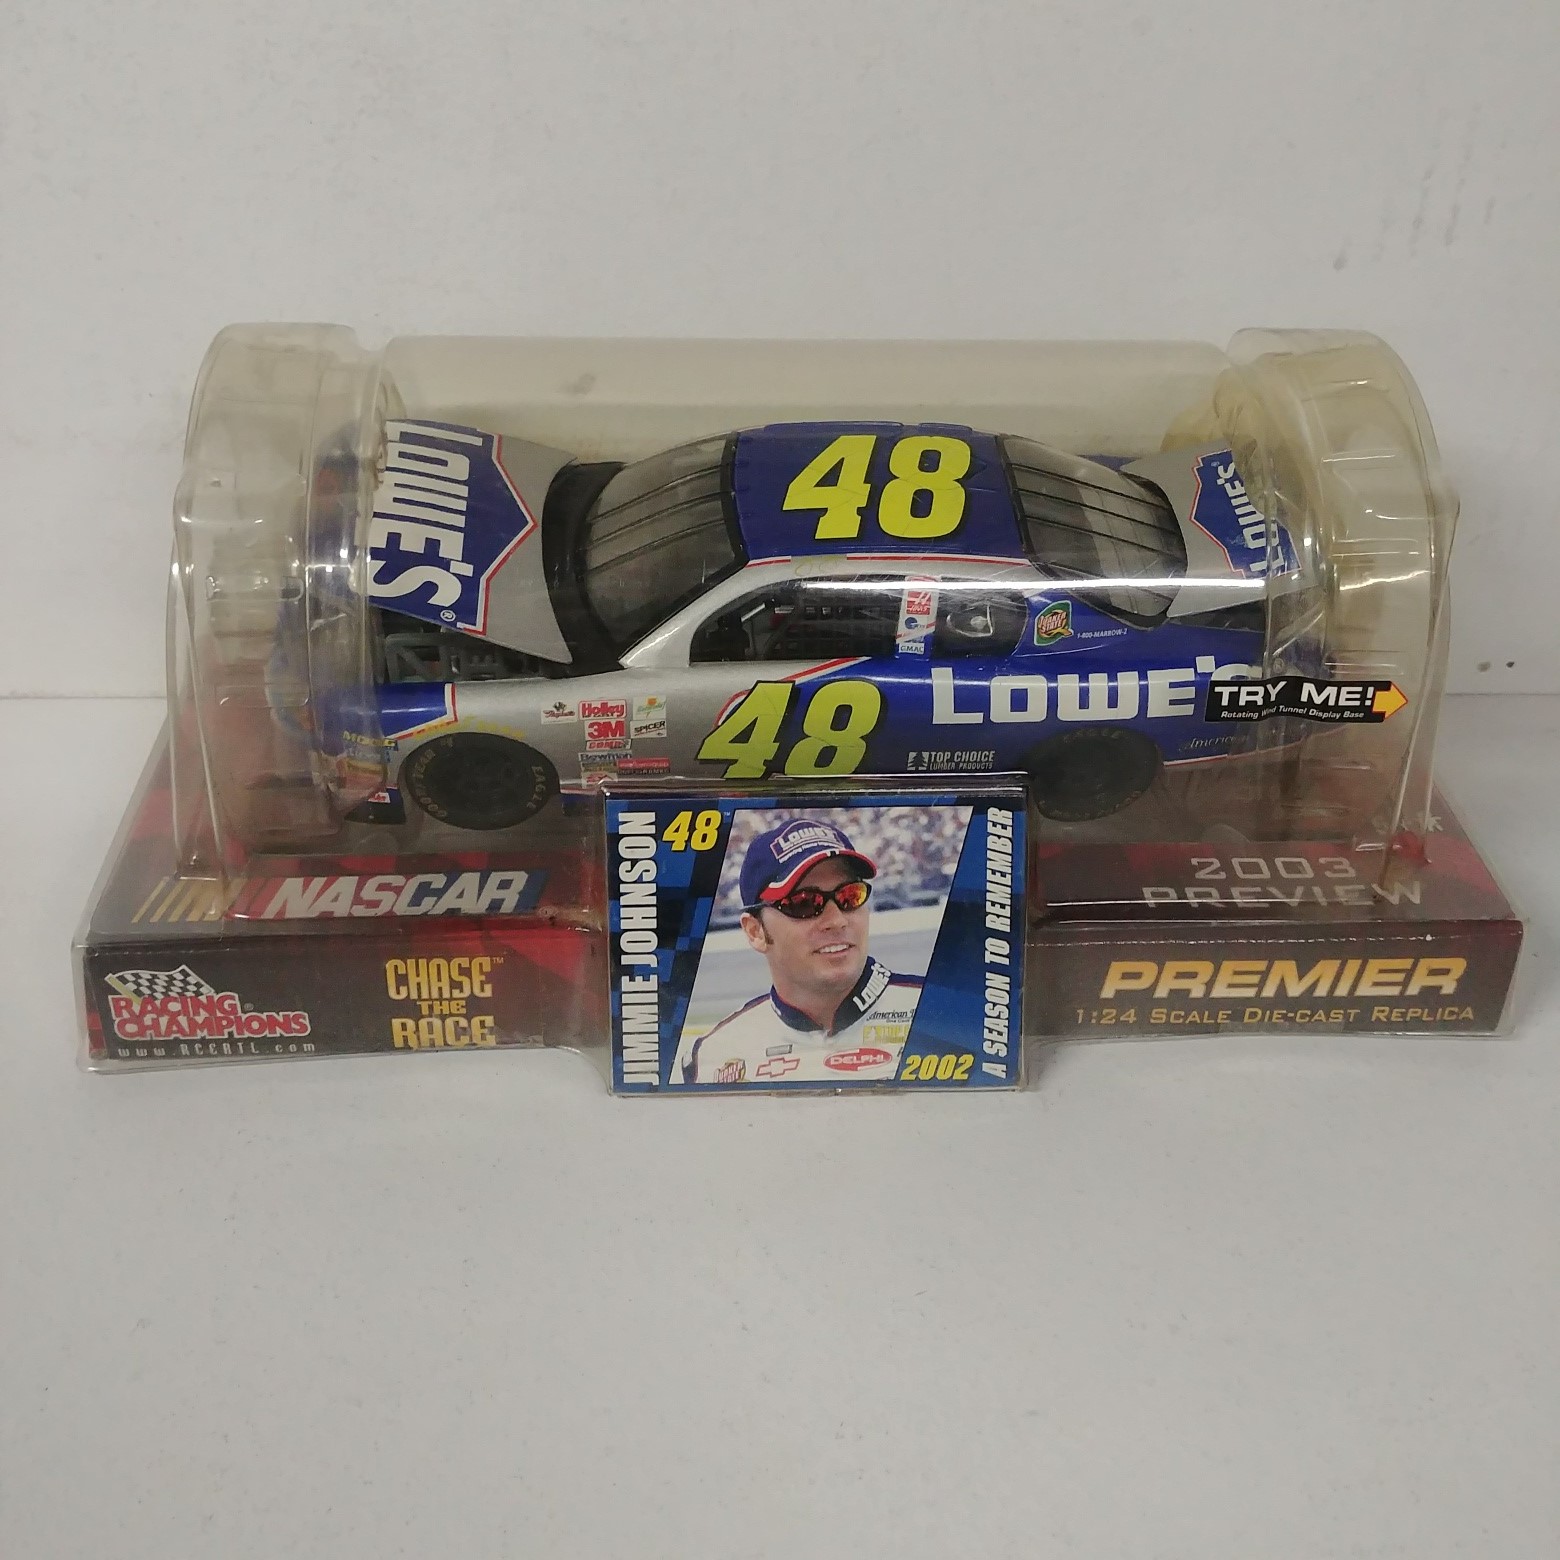 2003 Jimmie Johnson 1/24th Lowe's "Preview""Wind Tunnel" car